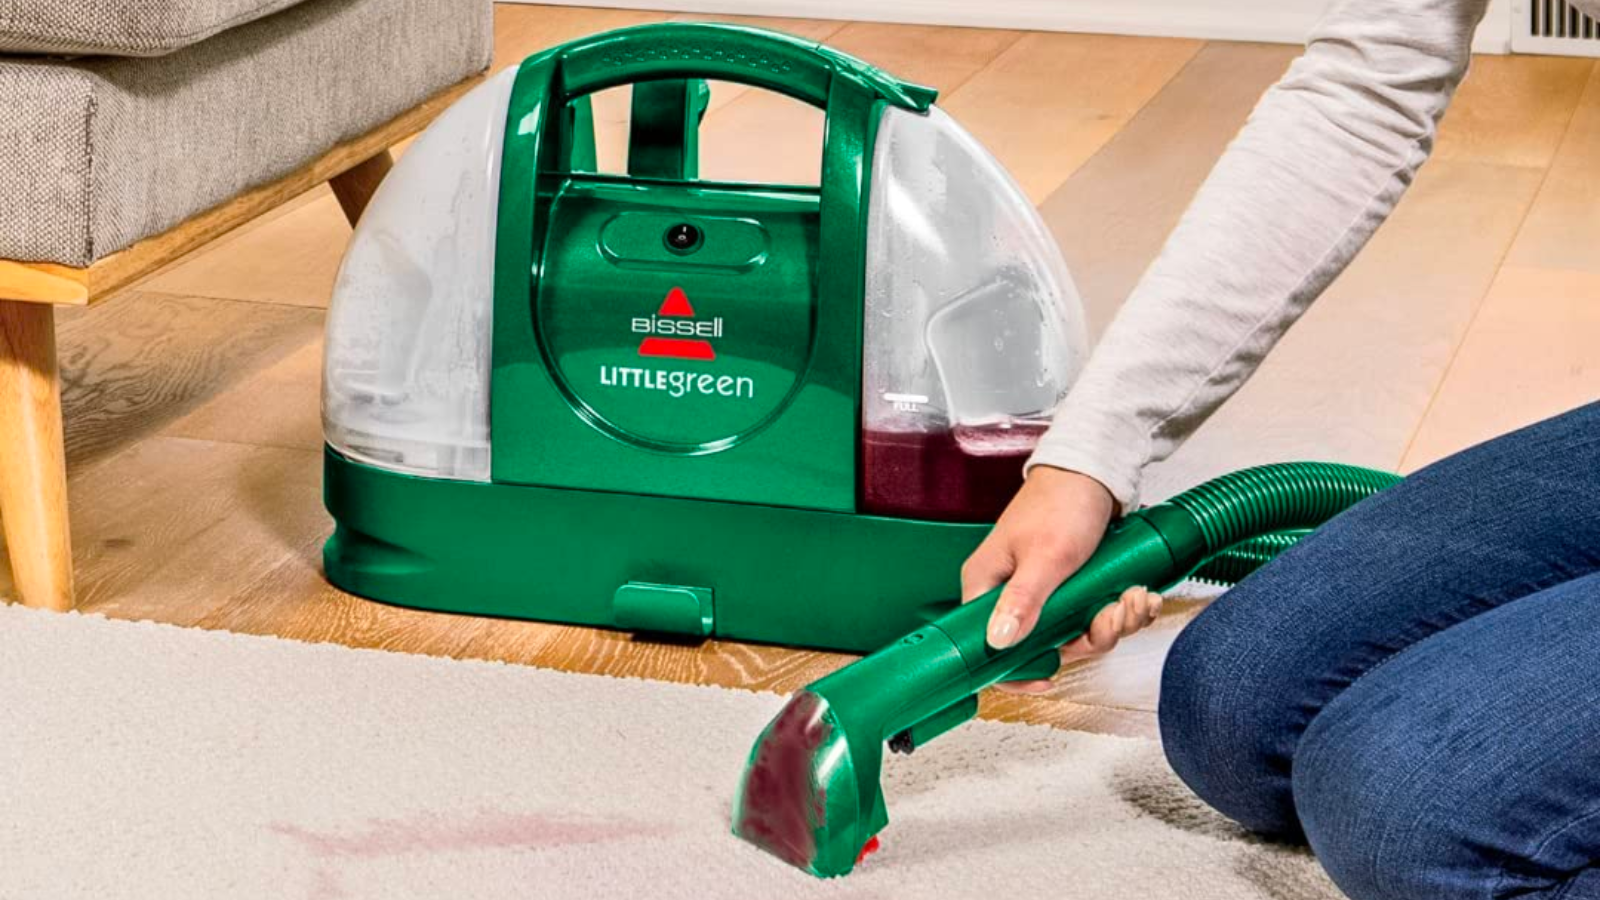 a woman in blue jeans kneels on a white carpet while removing a wine stain from it using the bissell little green cleaner